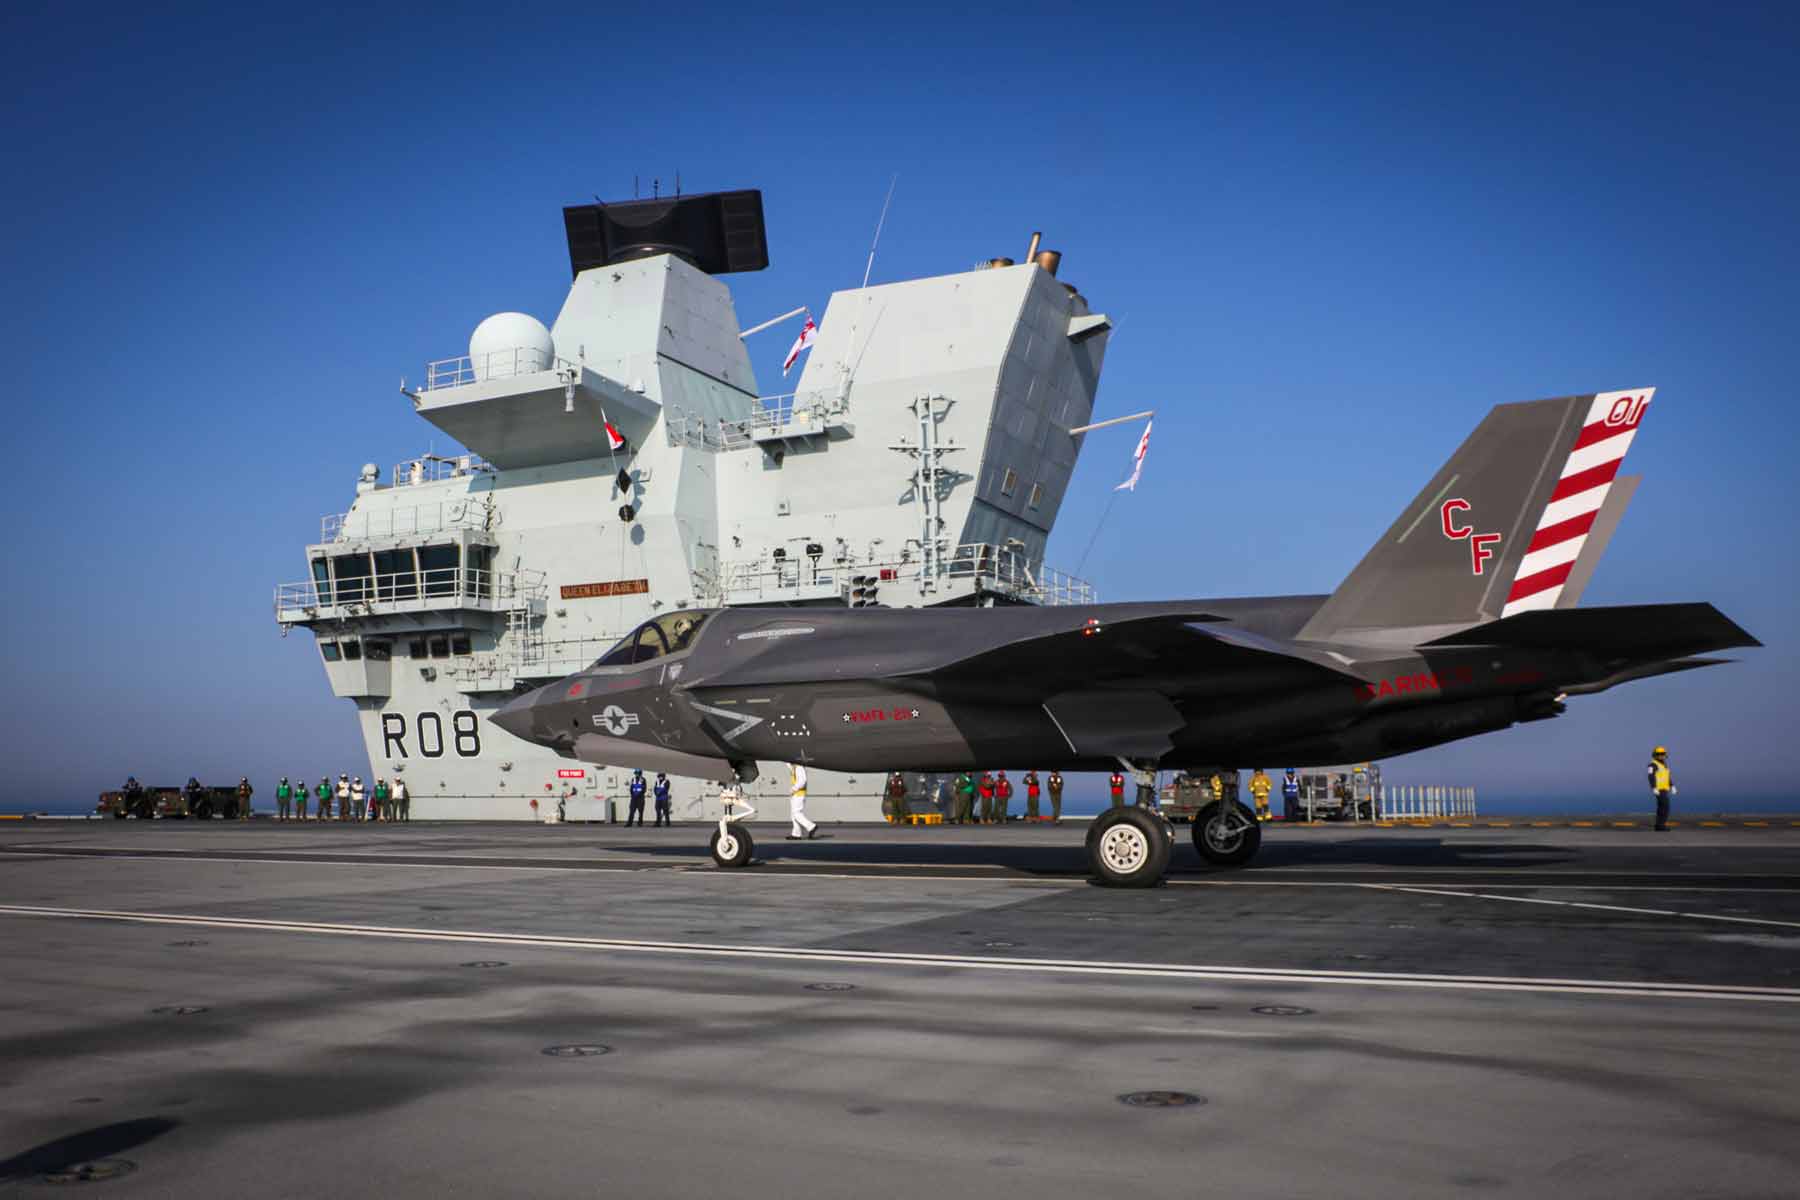 HMS Queen Elizabeth: F-35B Lightning Jet lands at Newcastle Airport -  diverting from aircraft carrier